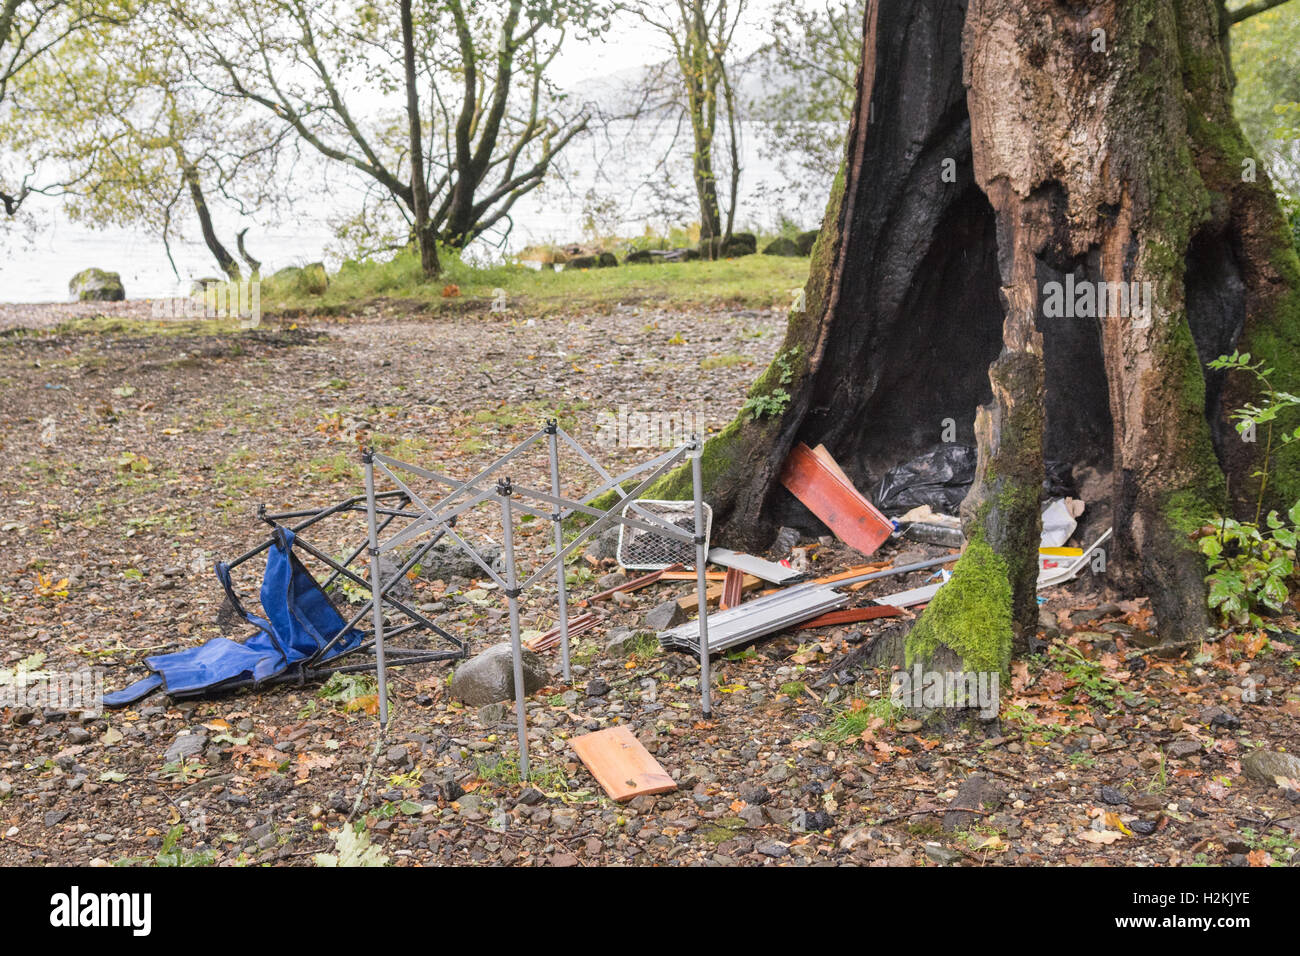 wild camping problems - Antisocial behaviour and environmental damage - on the Western shore of Loch Lomond Scotland - litter and debris burnt tree Stock Photo